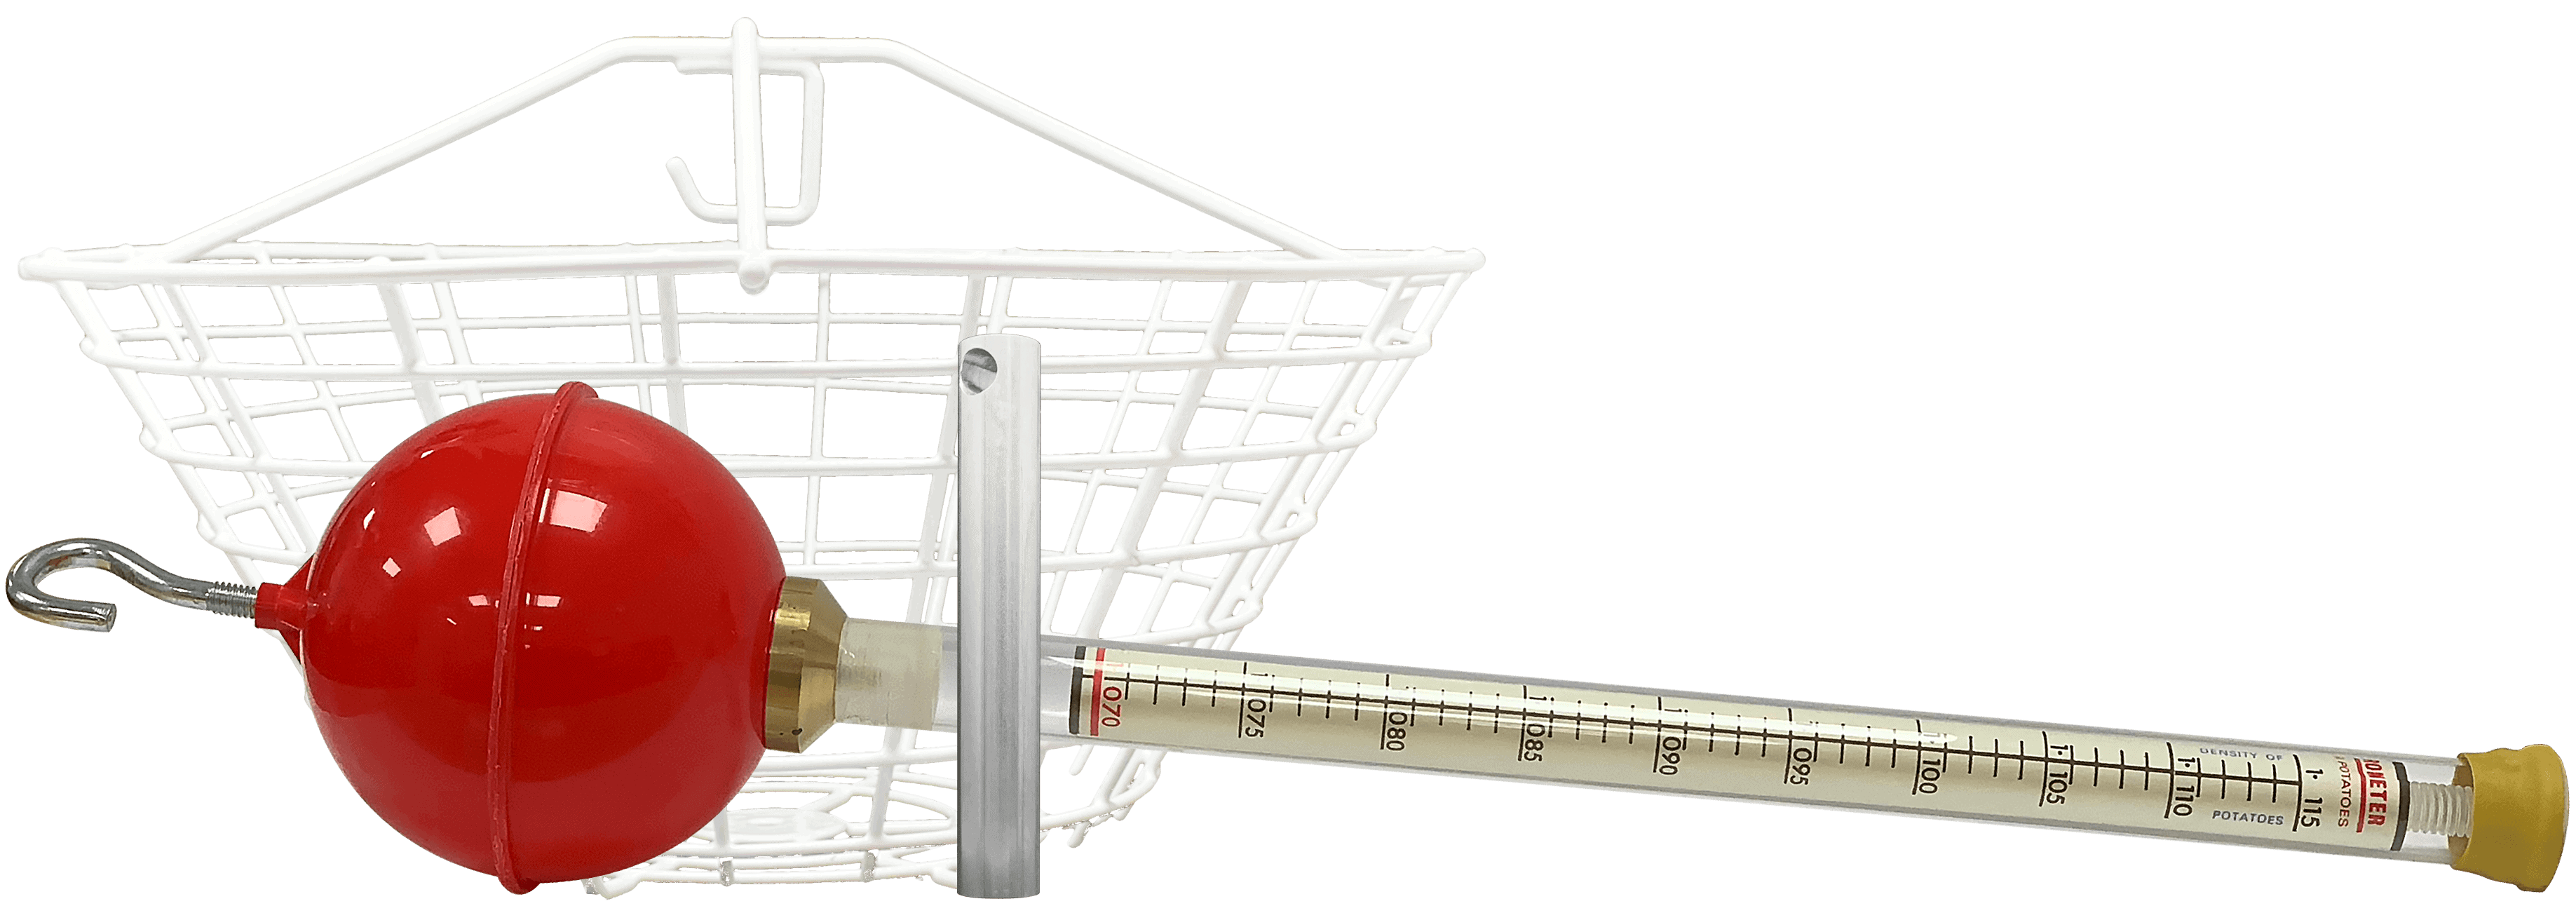 zeal manual hydrometer comes with calibration weight and basket